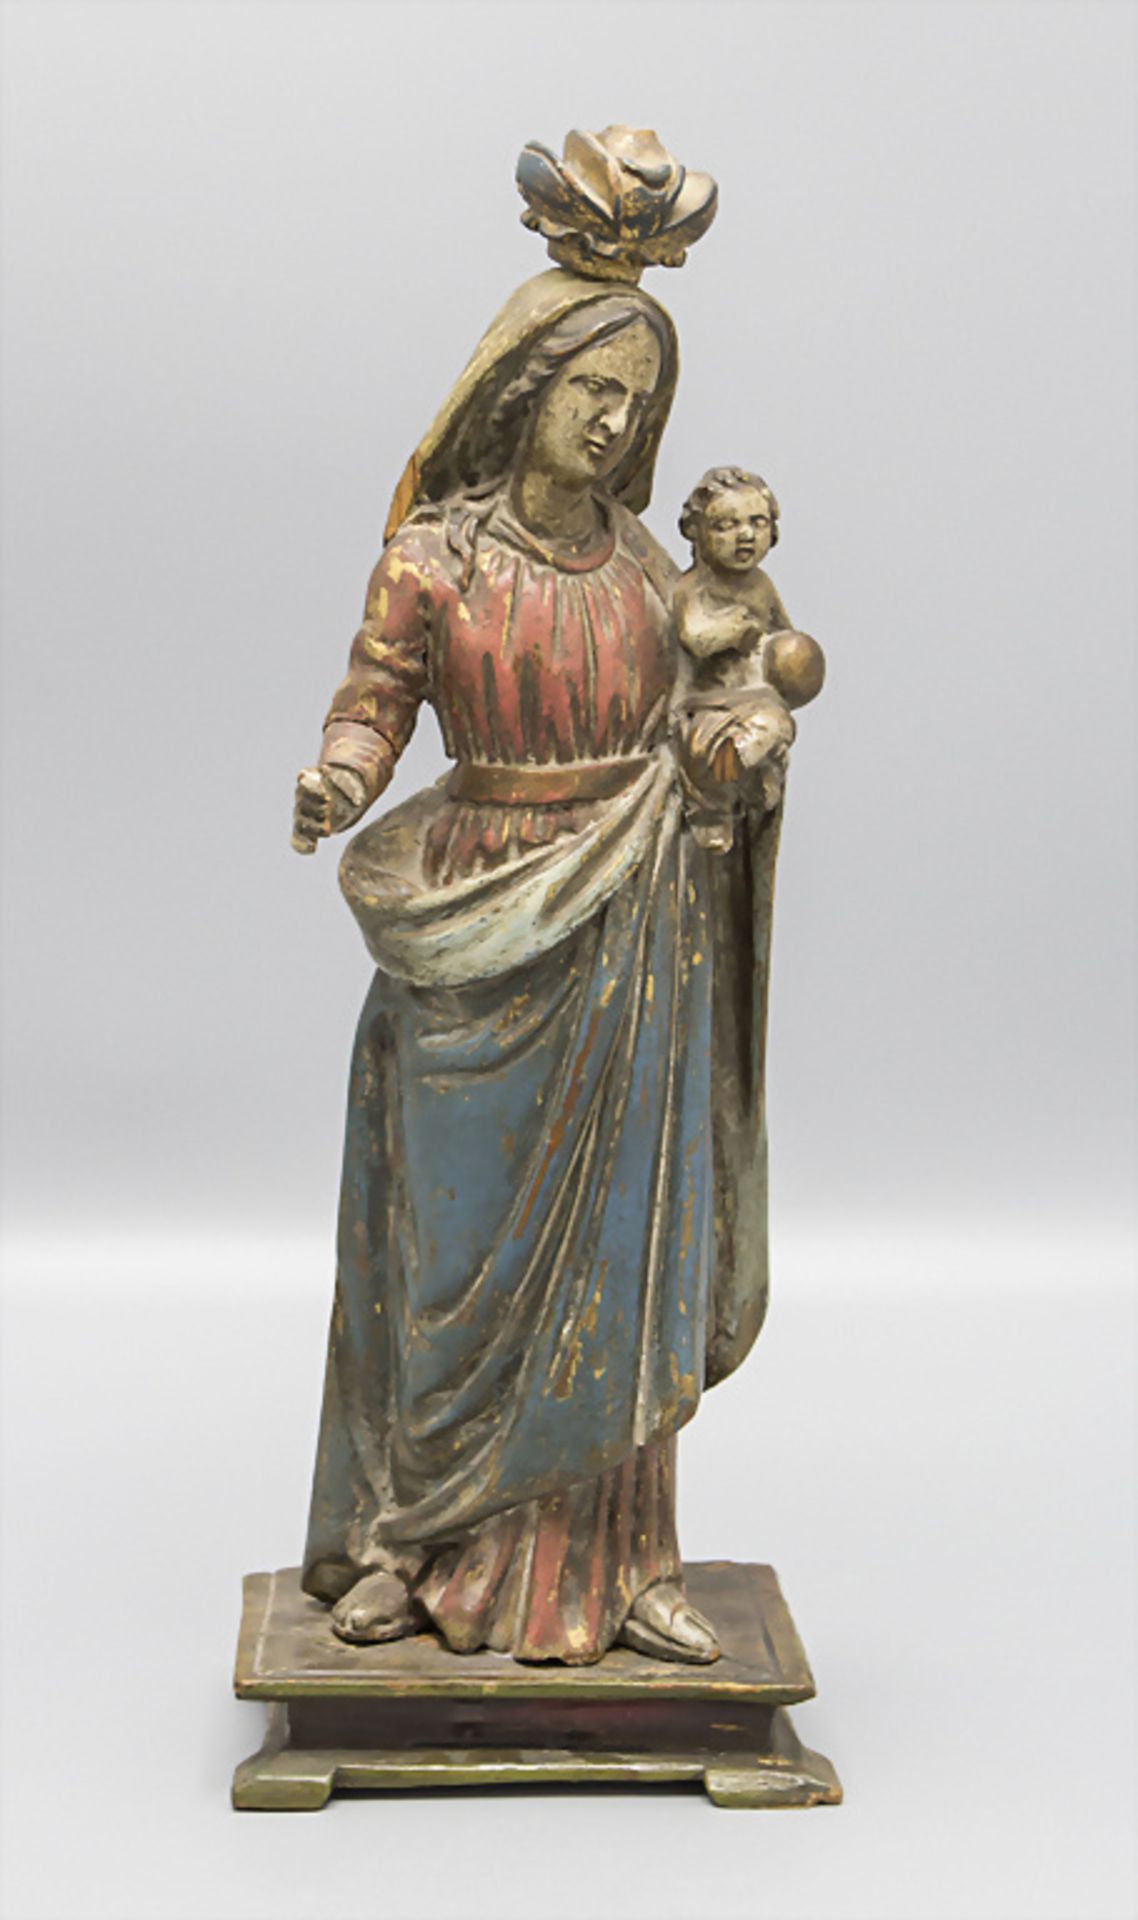 Holzskulptur einer Madonna mit Kind / A wooden sculpture of mother Mary with child, 18. Jh. - Image 2 of 6